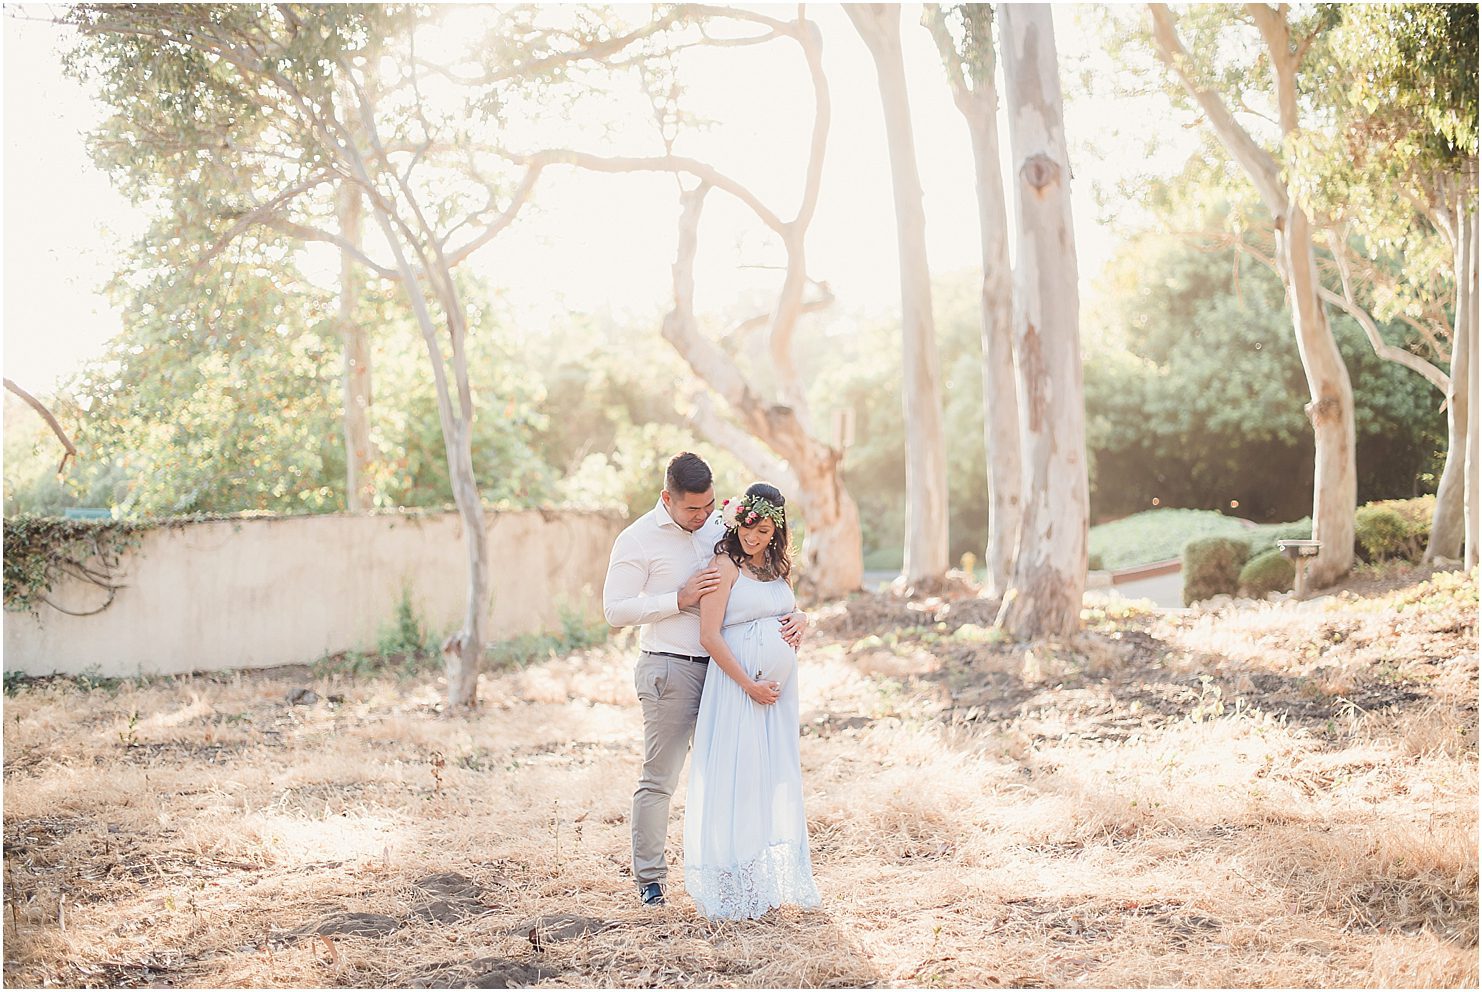 Holiday Mini Sessions in Palos Verdes